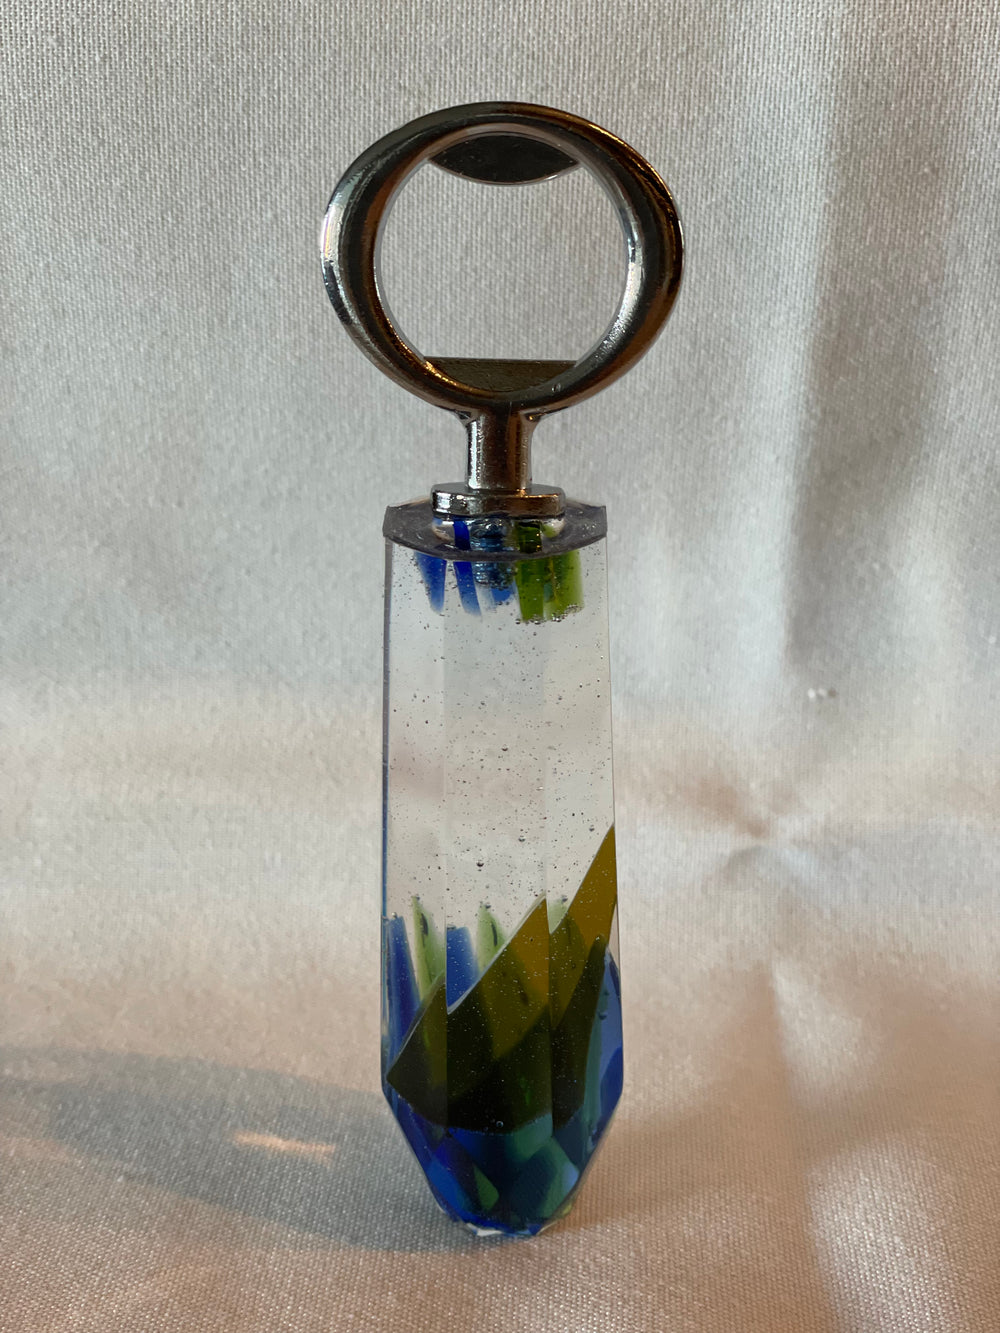 Resin bottle opener embedded with recycled wine bottle glass